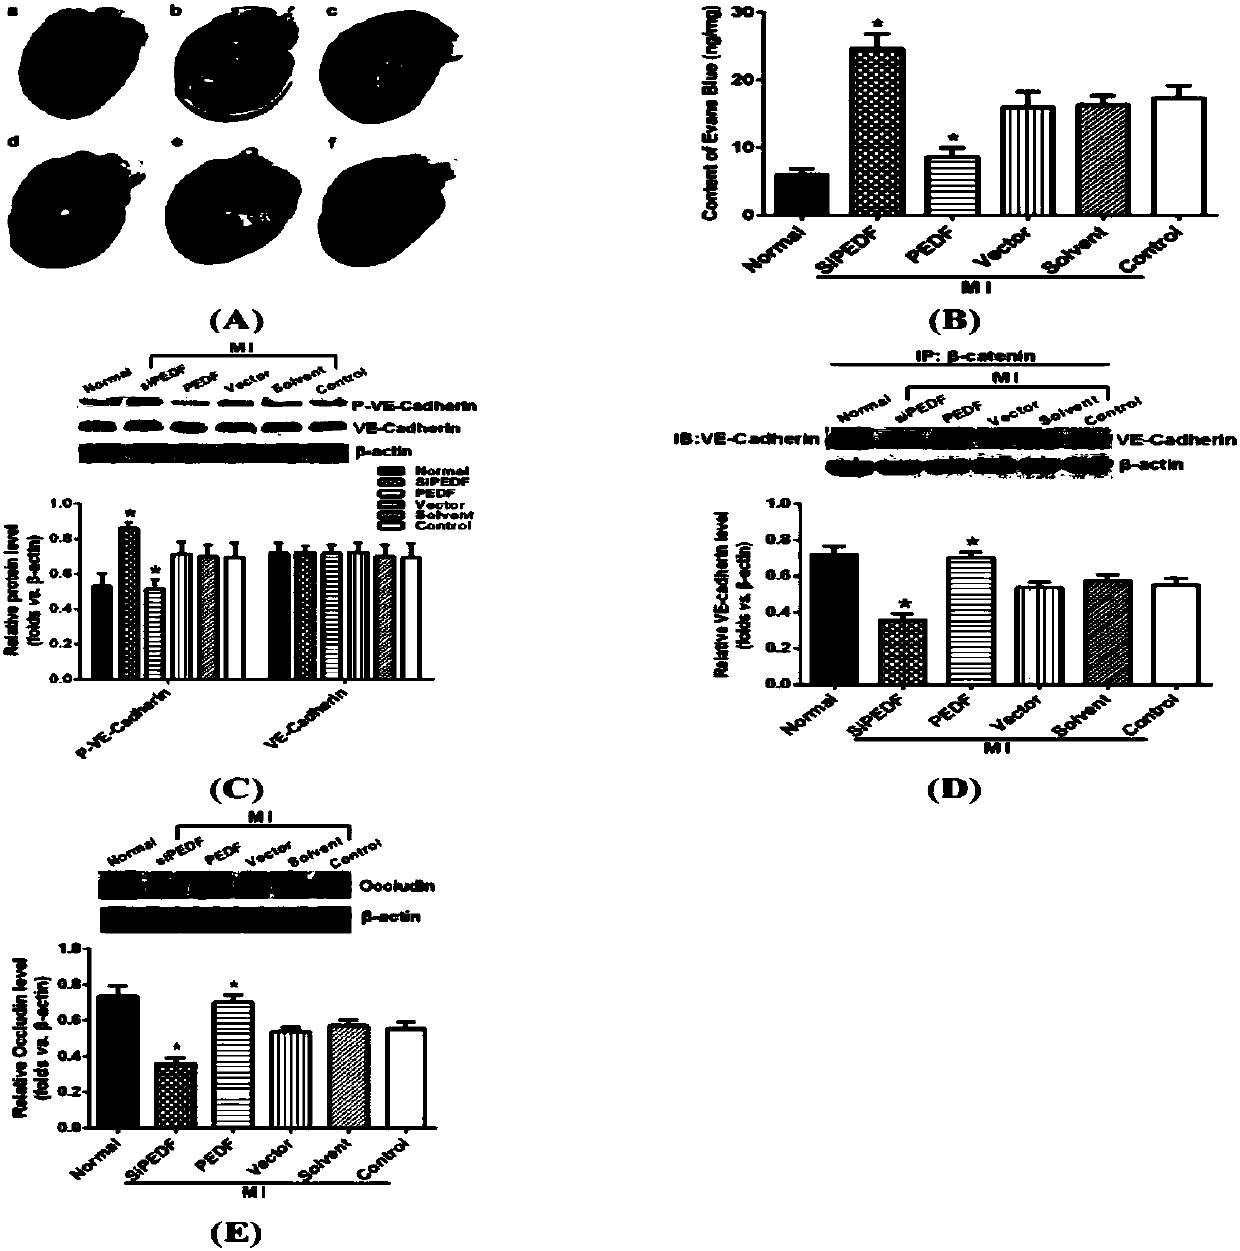 Use of derived polypeptide series of pigment epithelium derived factors in ischemic myocardium protection